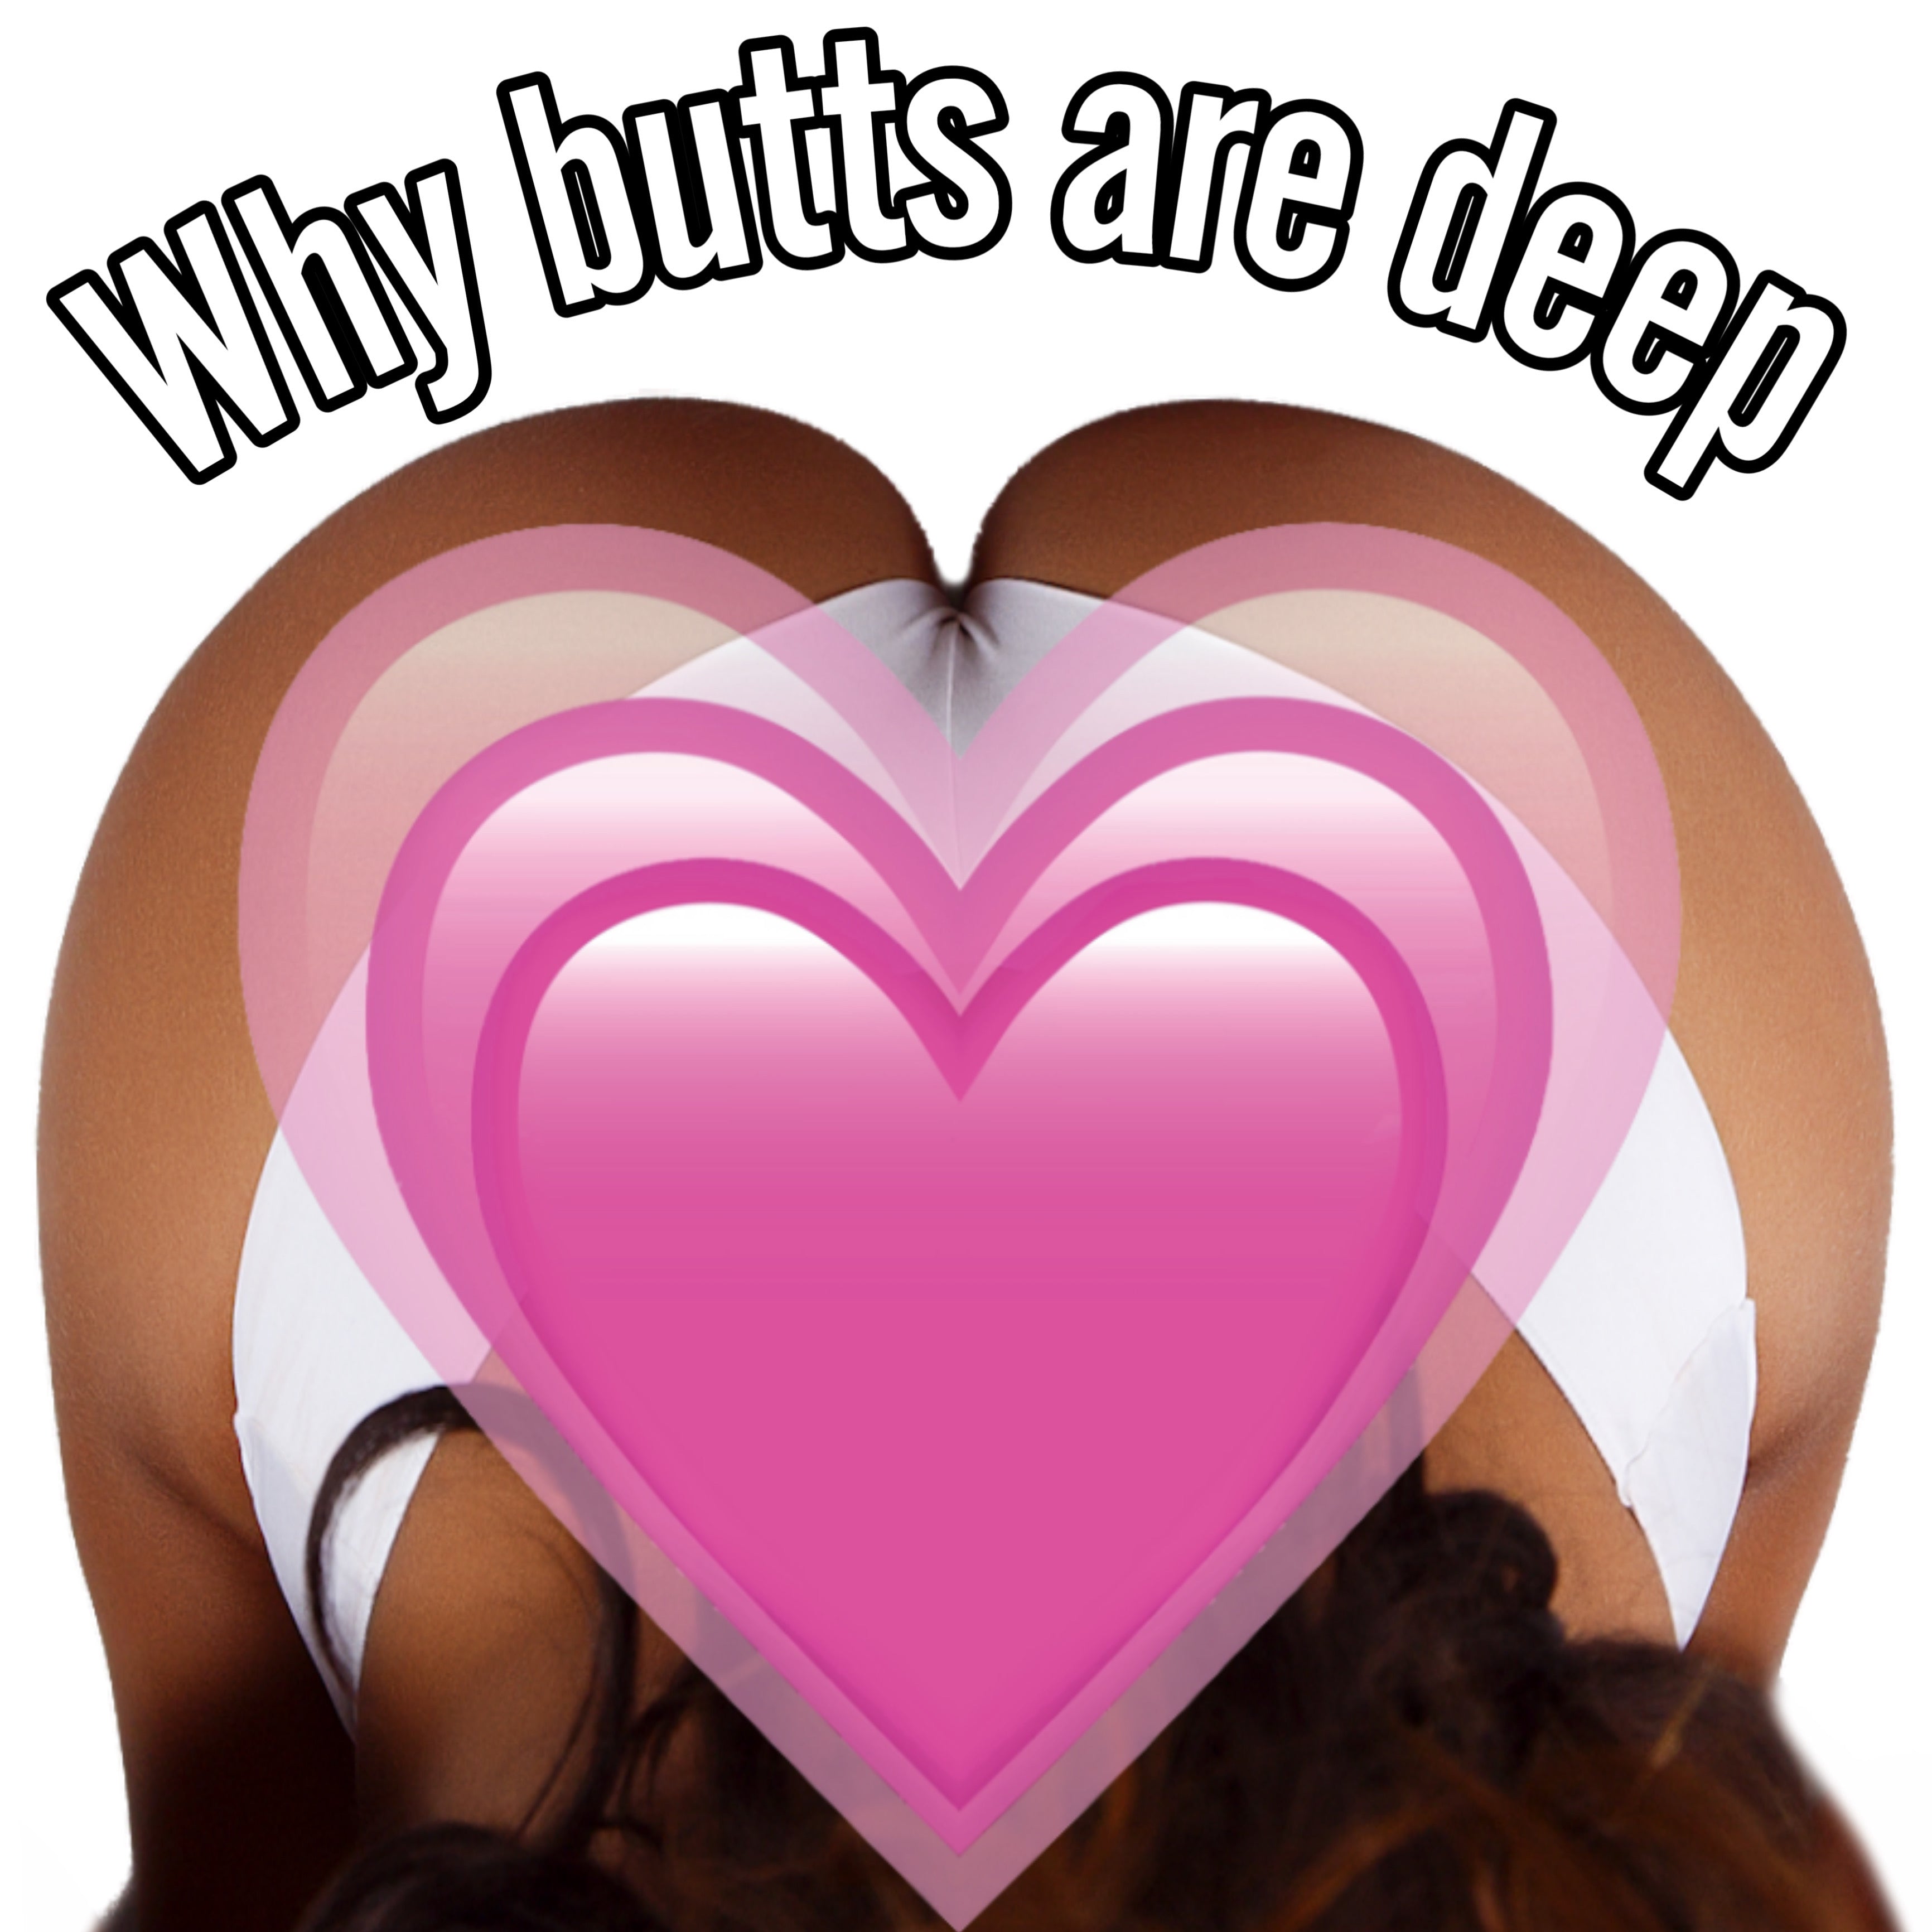 Why butts are deep